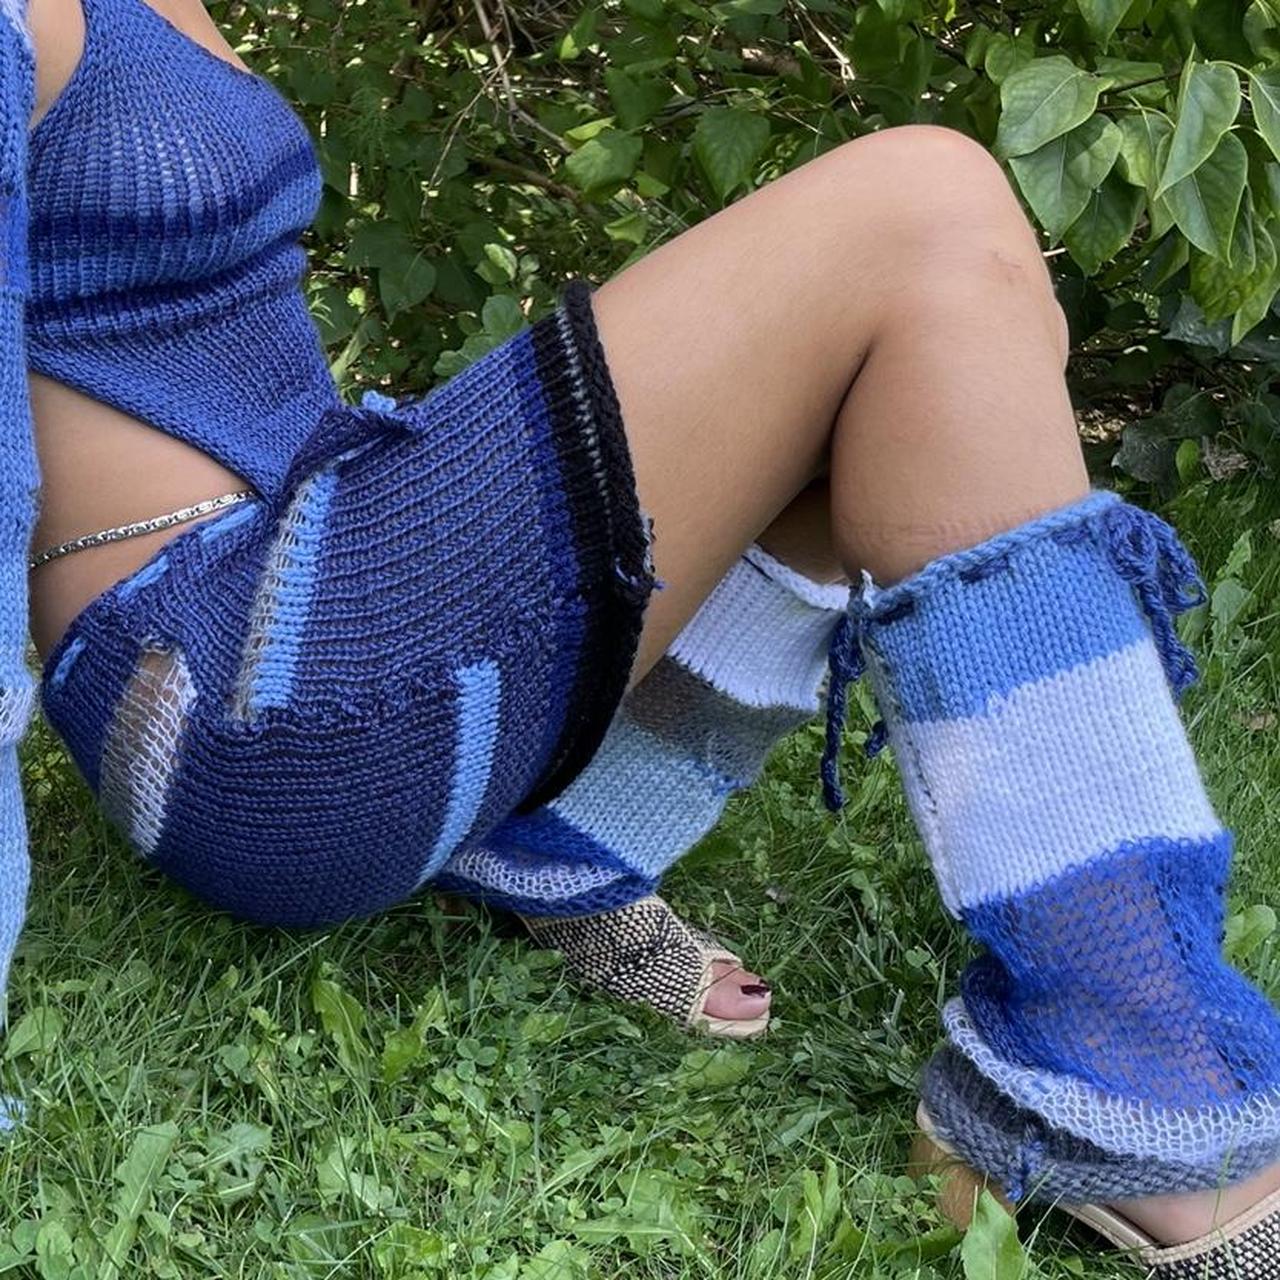 Blue ombré leg warmers! These guys are so cute 💗🎀 - Depop